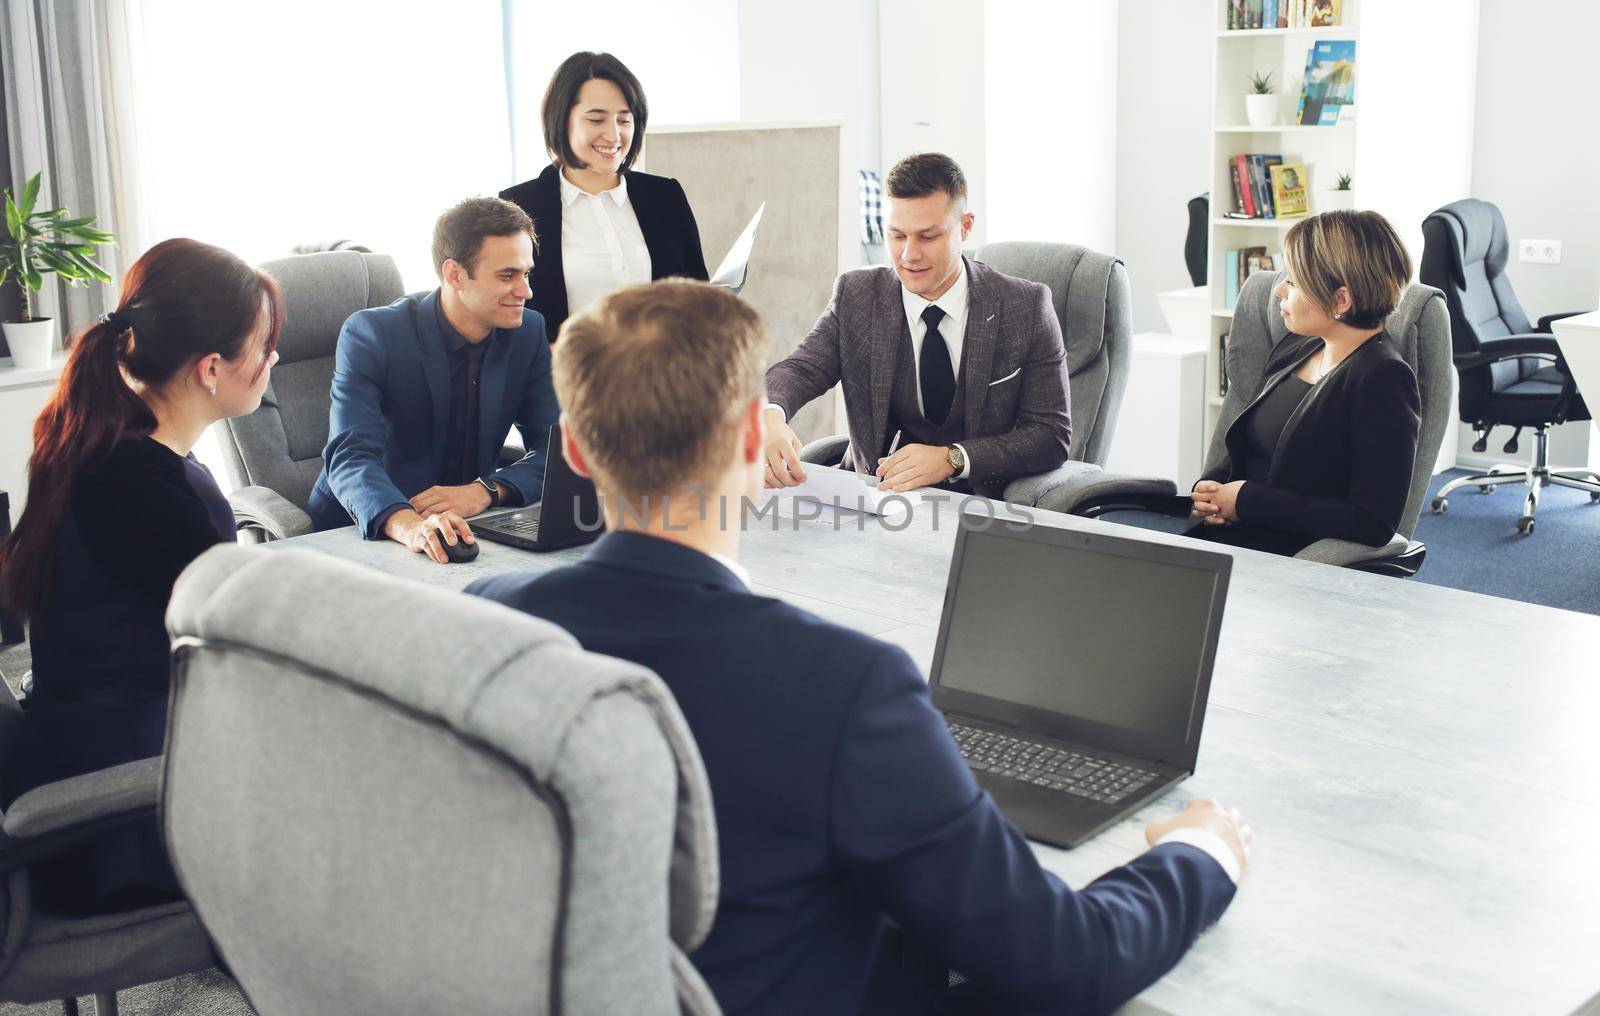 Group of young successful businessmen lawyers communicating together in a conference room while working on a project by selinsmo